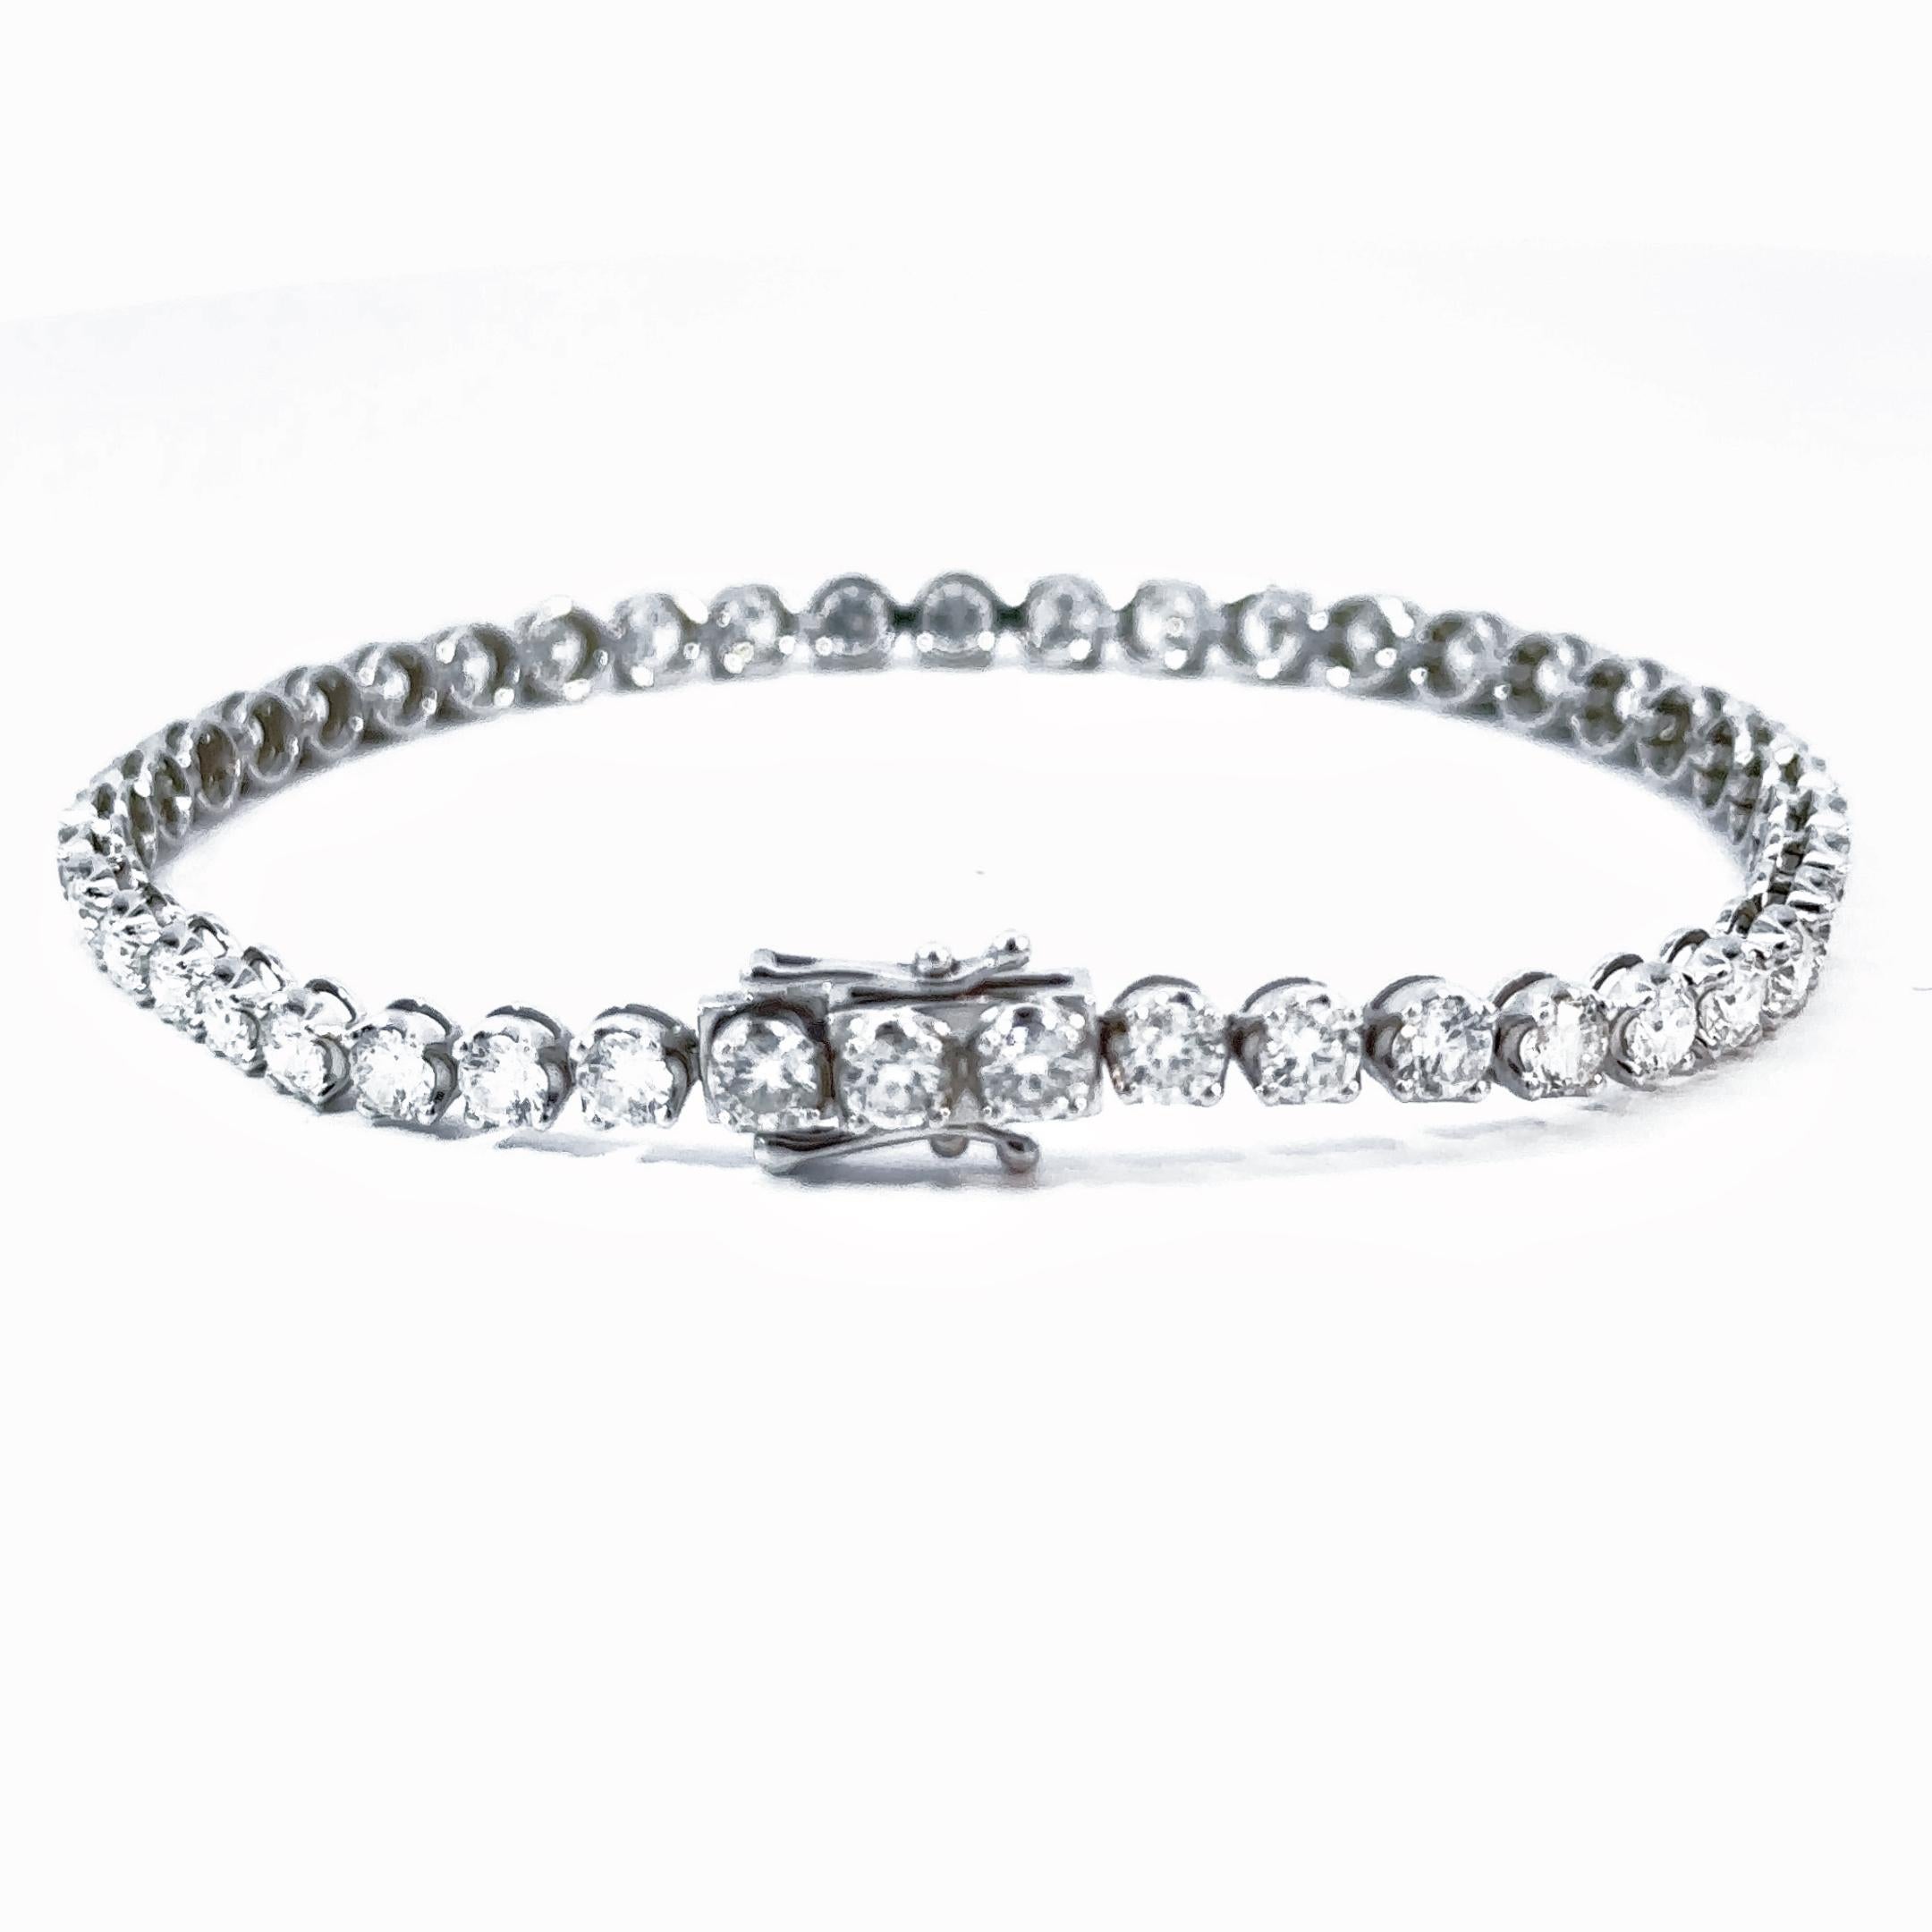 Modern and elegant, this diamond bracelet is part of Xuelai Jewellery London classic lines collection. Composed of a single row of ethically sourced round brilliant diamonds, their combined weight totals 4.32 carats. Each diamond is prong-set in 18k